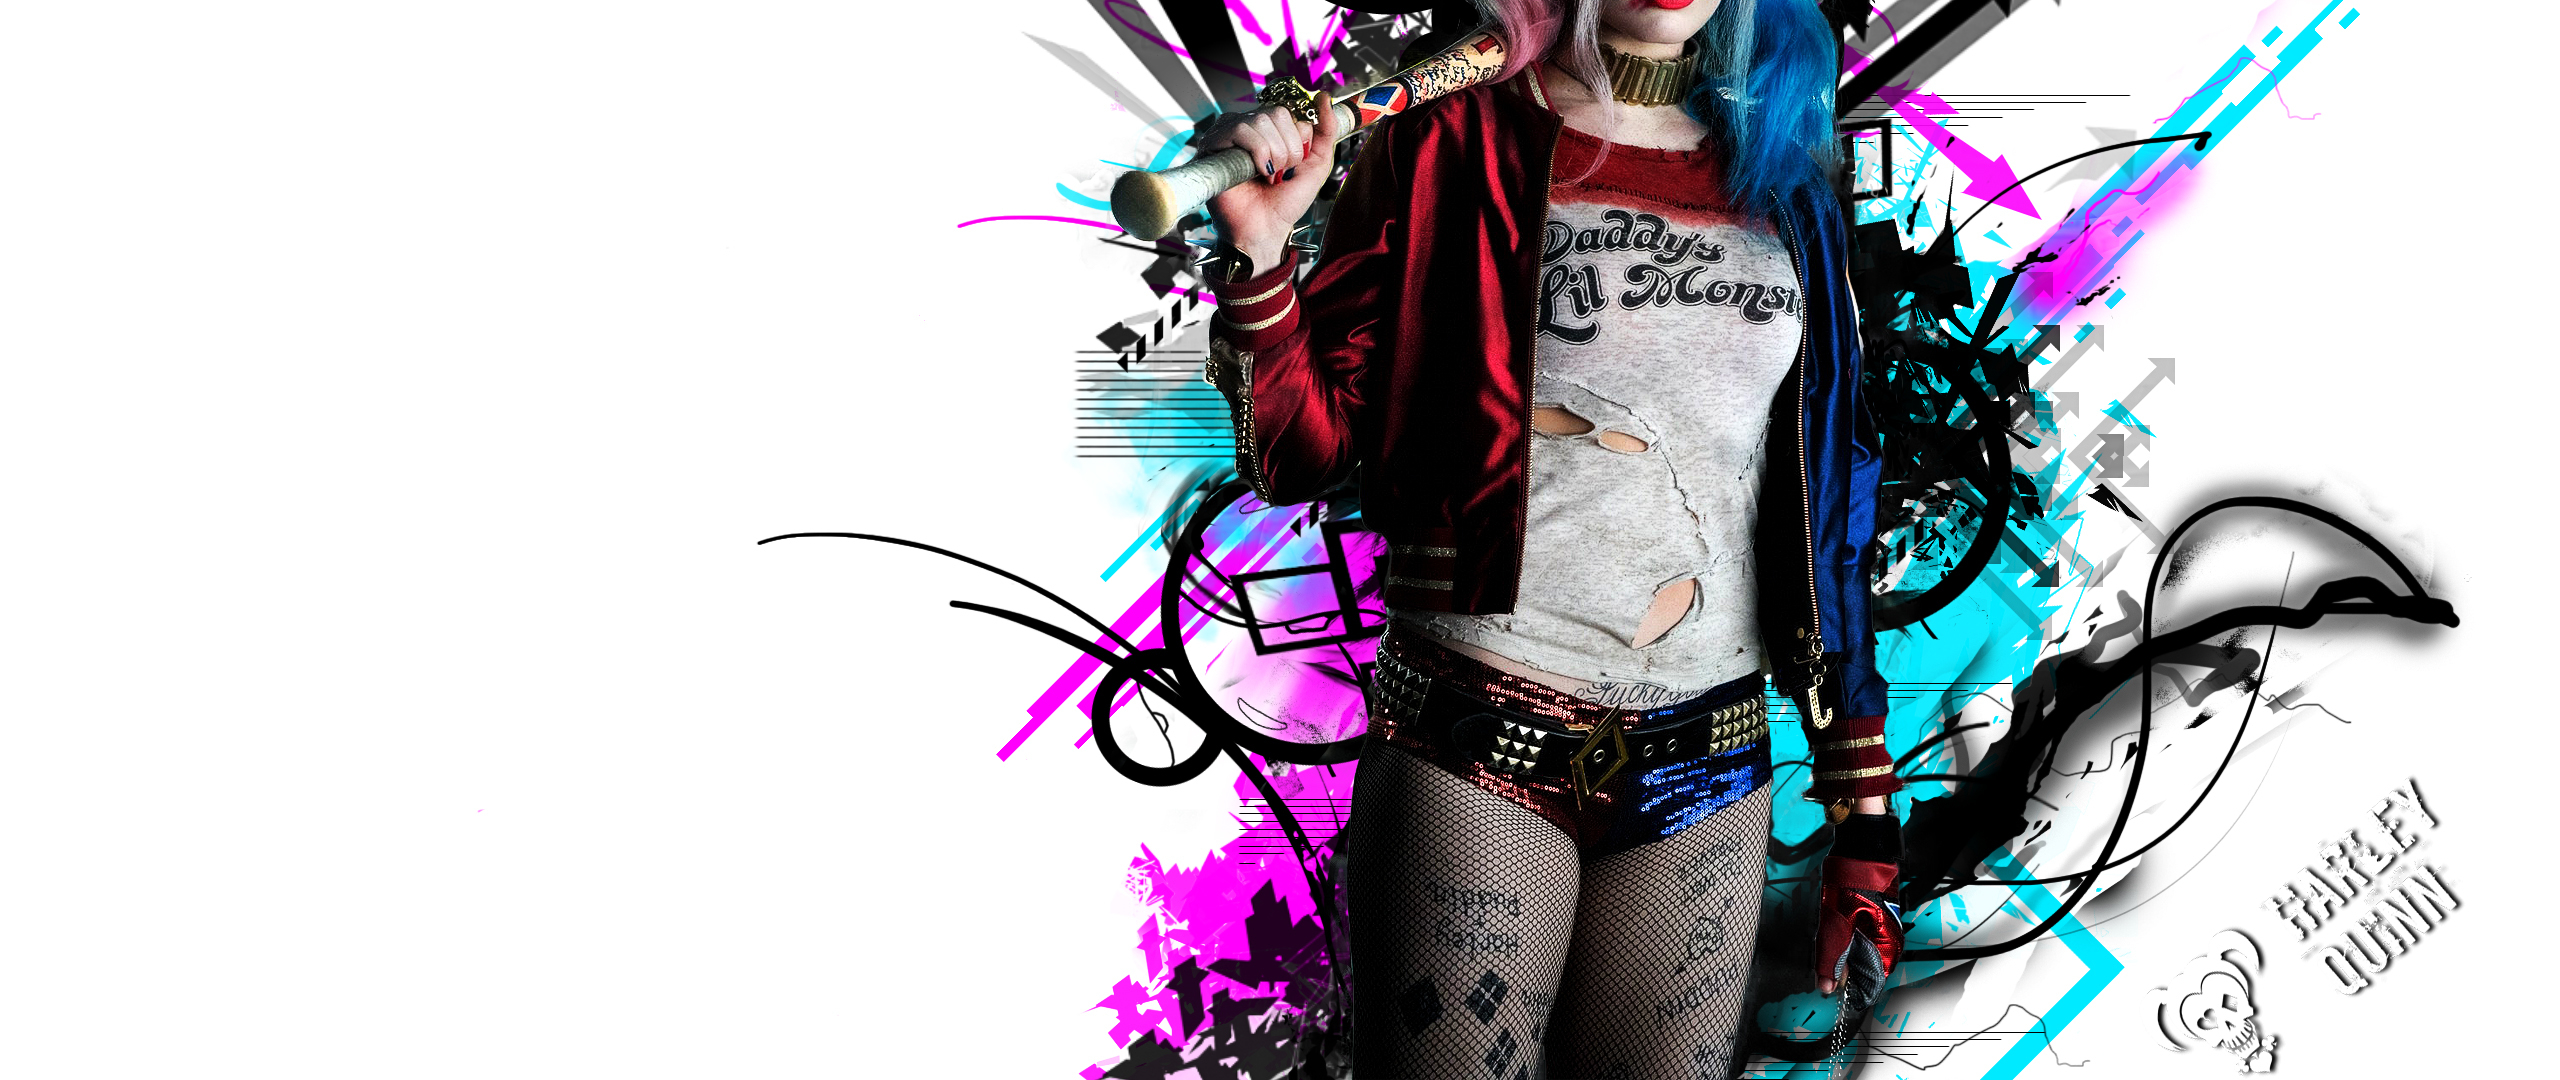 harley quinn mobile wallpaper,cool,graphic design,pink,fashion,font